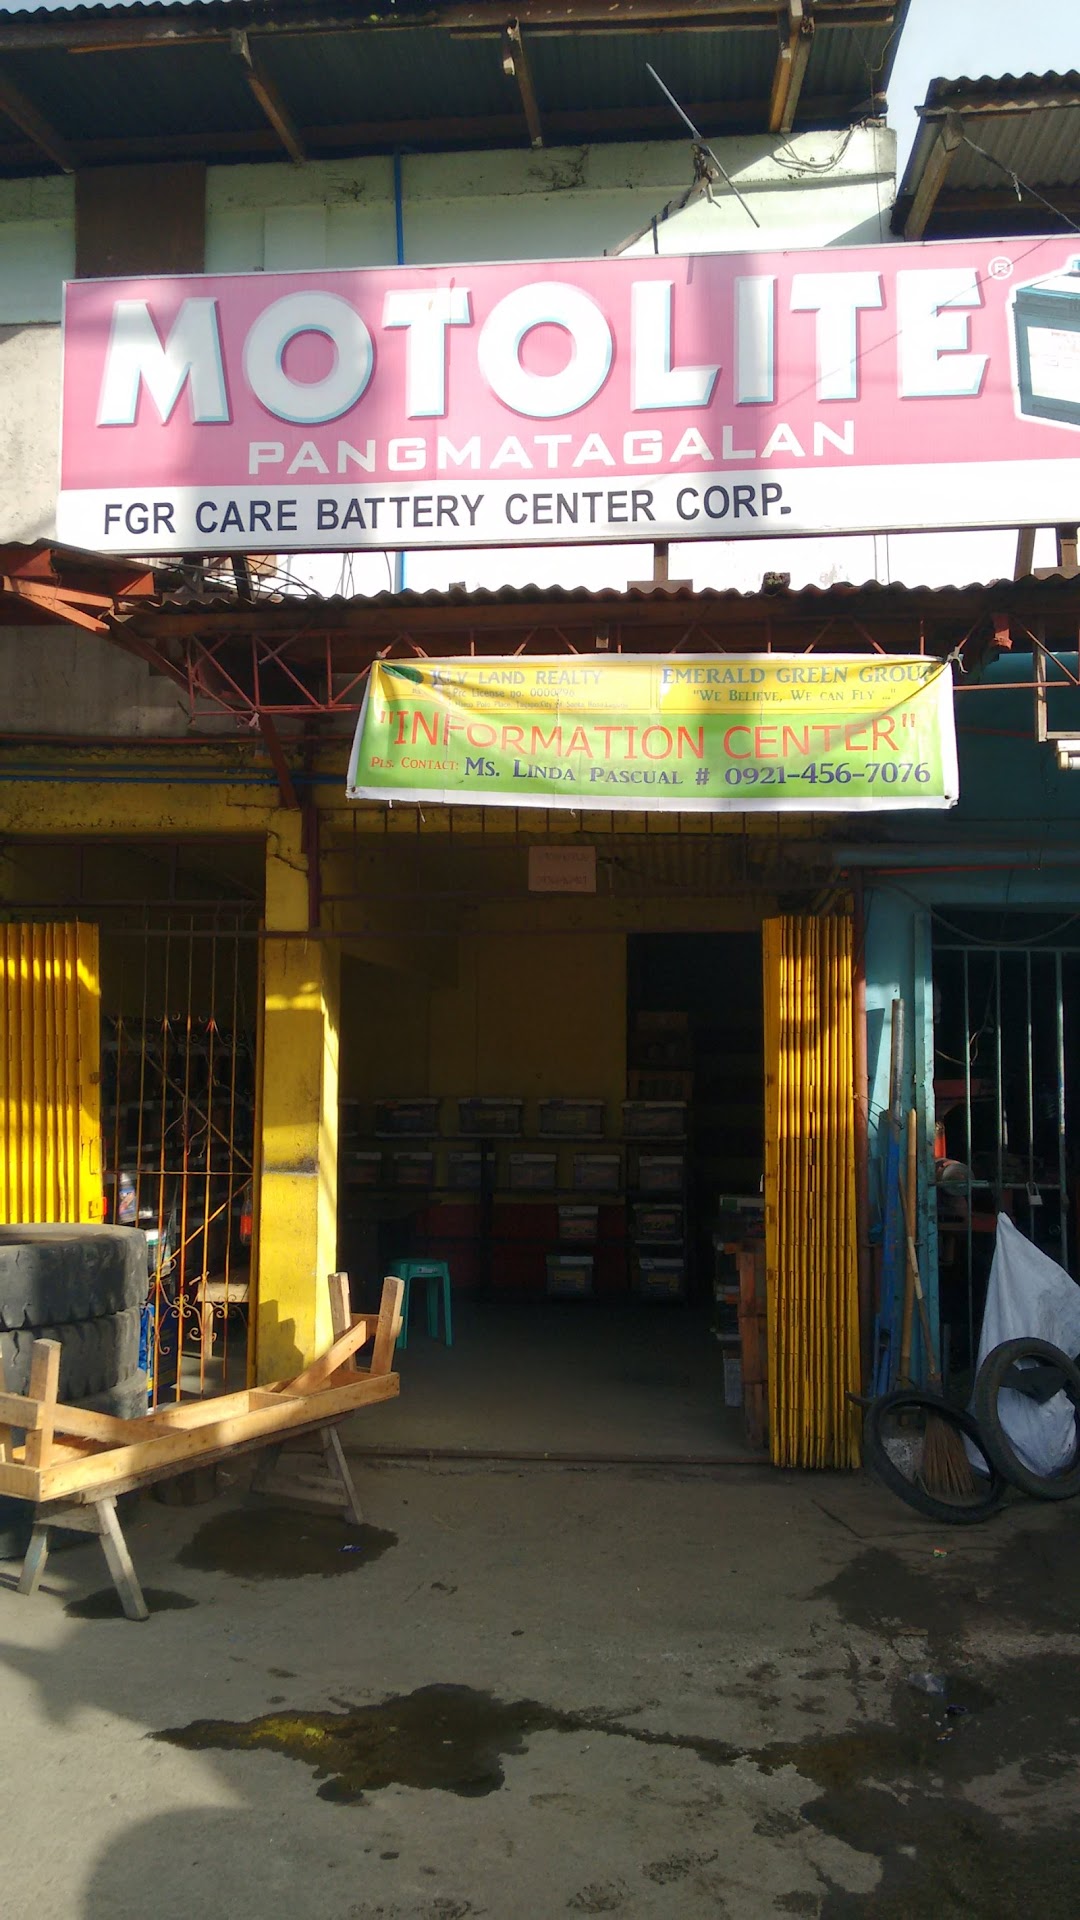 FGR Care Battery Center Corp.